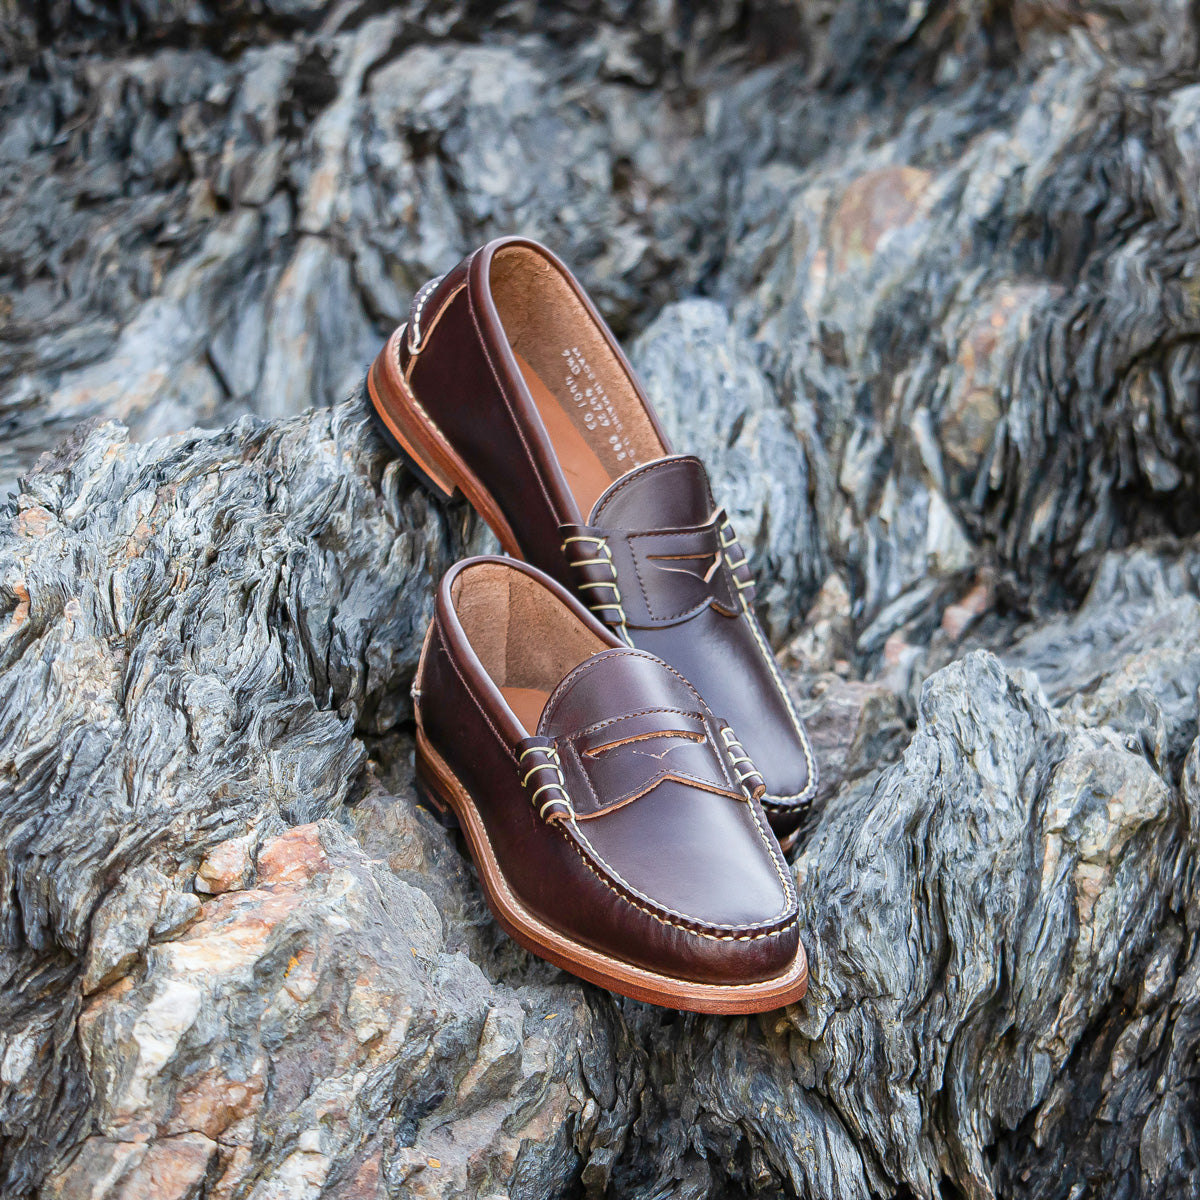 Beefroll Penny Loafers - Carolina Brown Chromexcel | Rancourt & Co ...